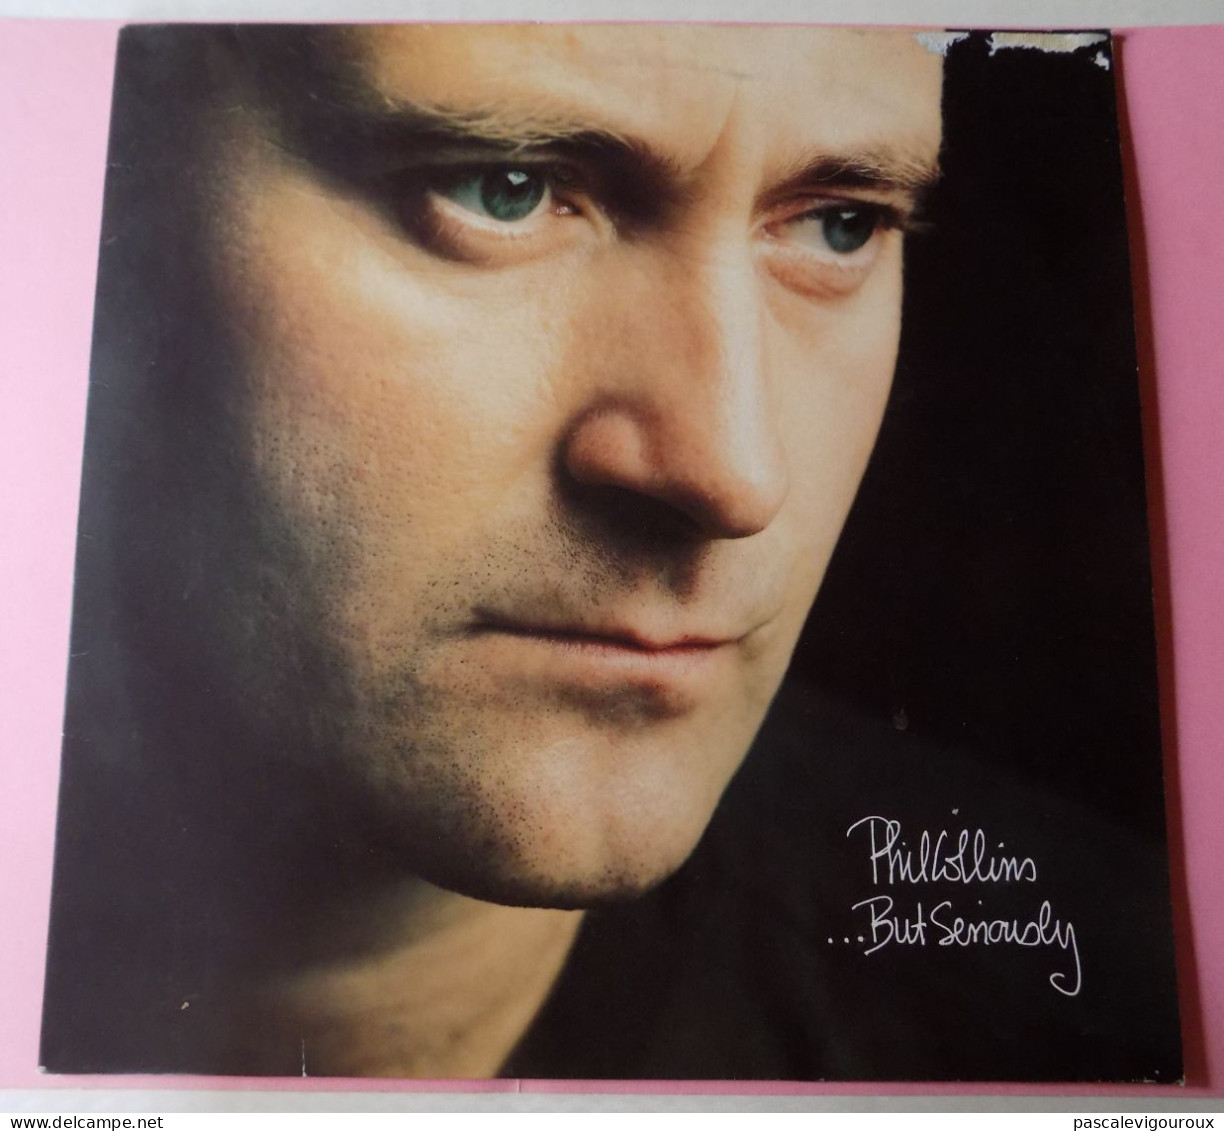 PHIL COLLINS / BUT SERIOUSLY / VINYLE STEREO LP 33T / 1989 / WEA INTERNATIONAL - Autres - Musique Anglaise